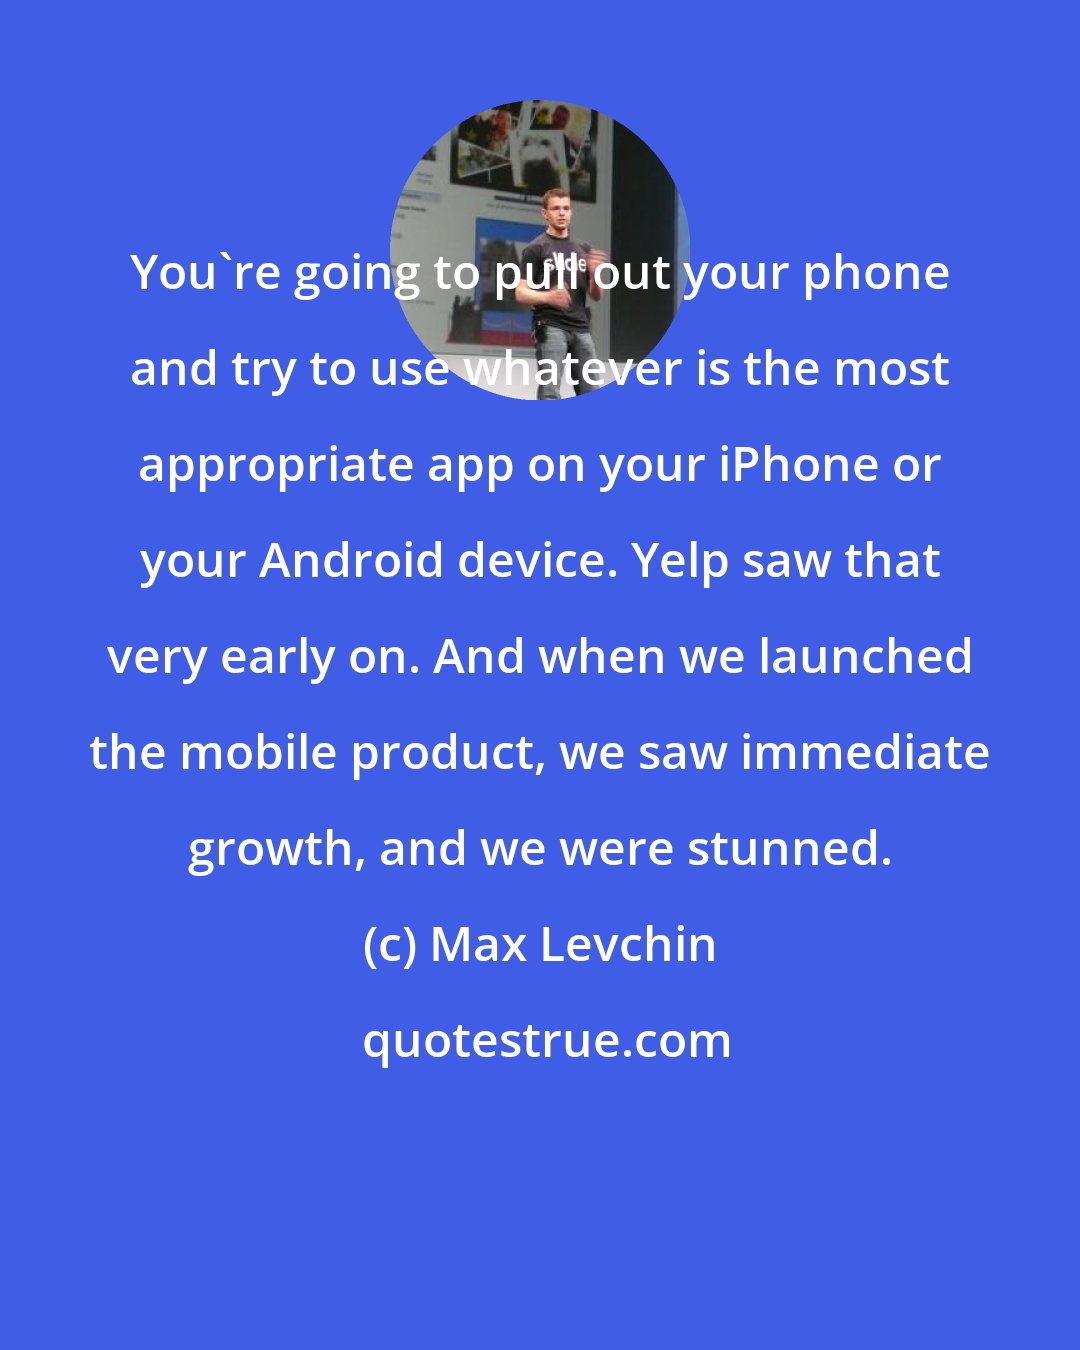 Max Levchin: You're going to pull out your phone and try to use whatever is the most appropriate app on your iPhone or your Android device. Yelp saw that very early on. And when we launched the mobile product, we saw immediate growth, and we were stunned.